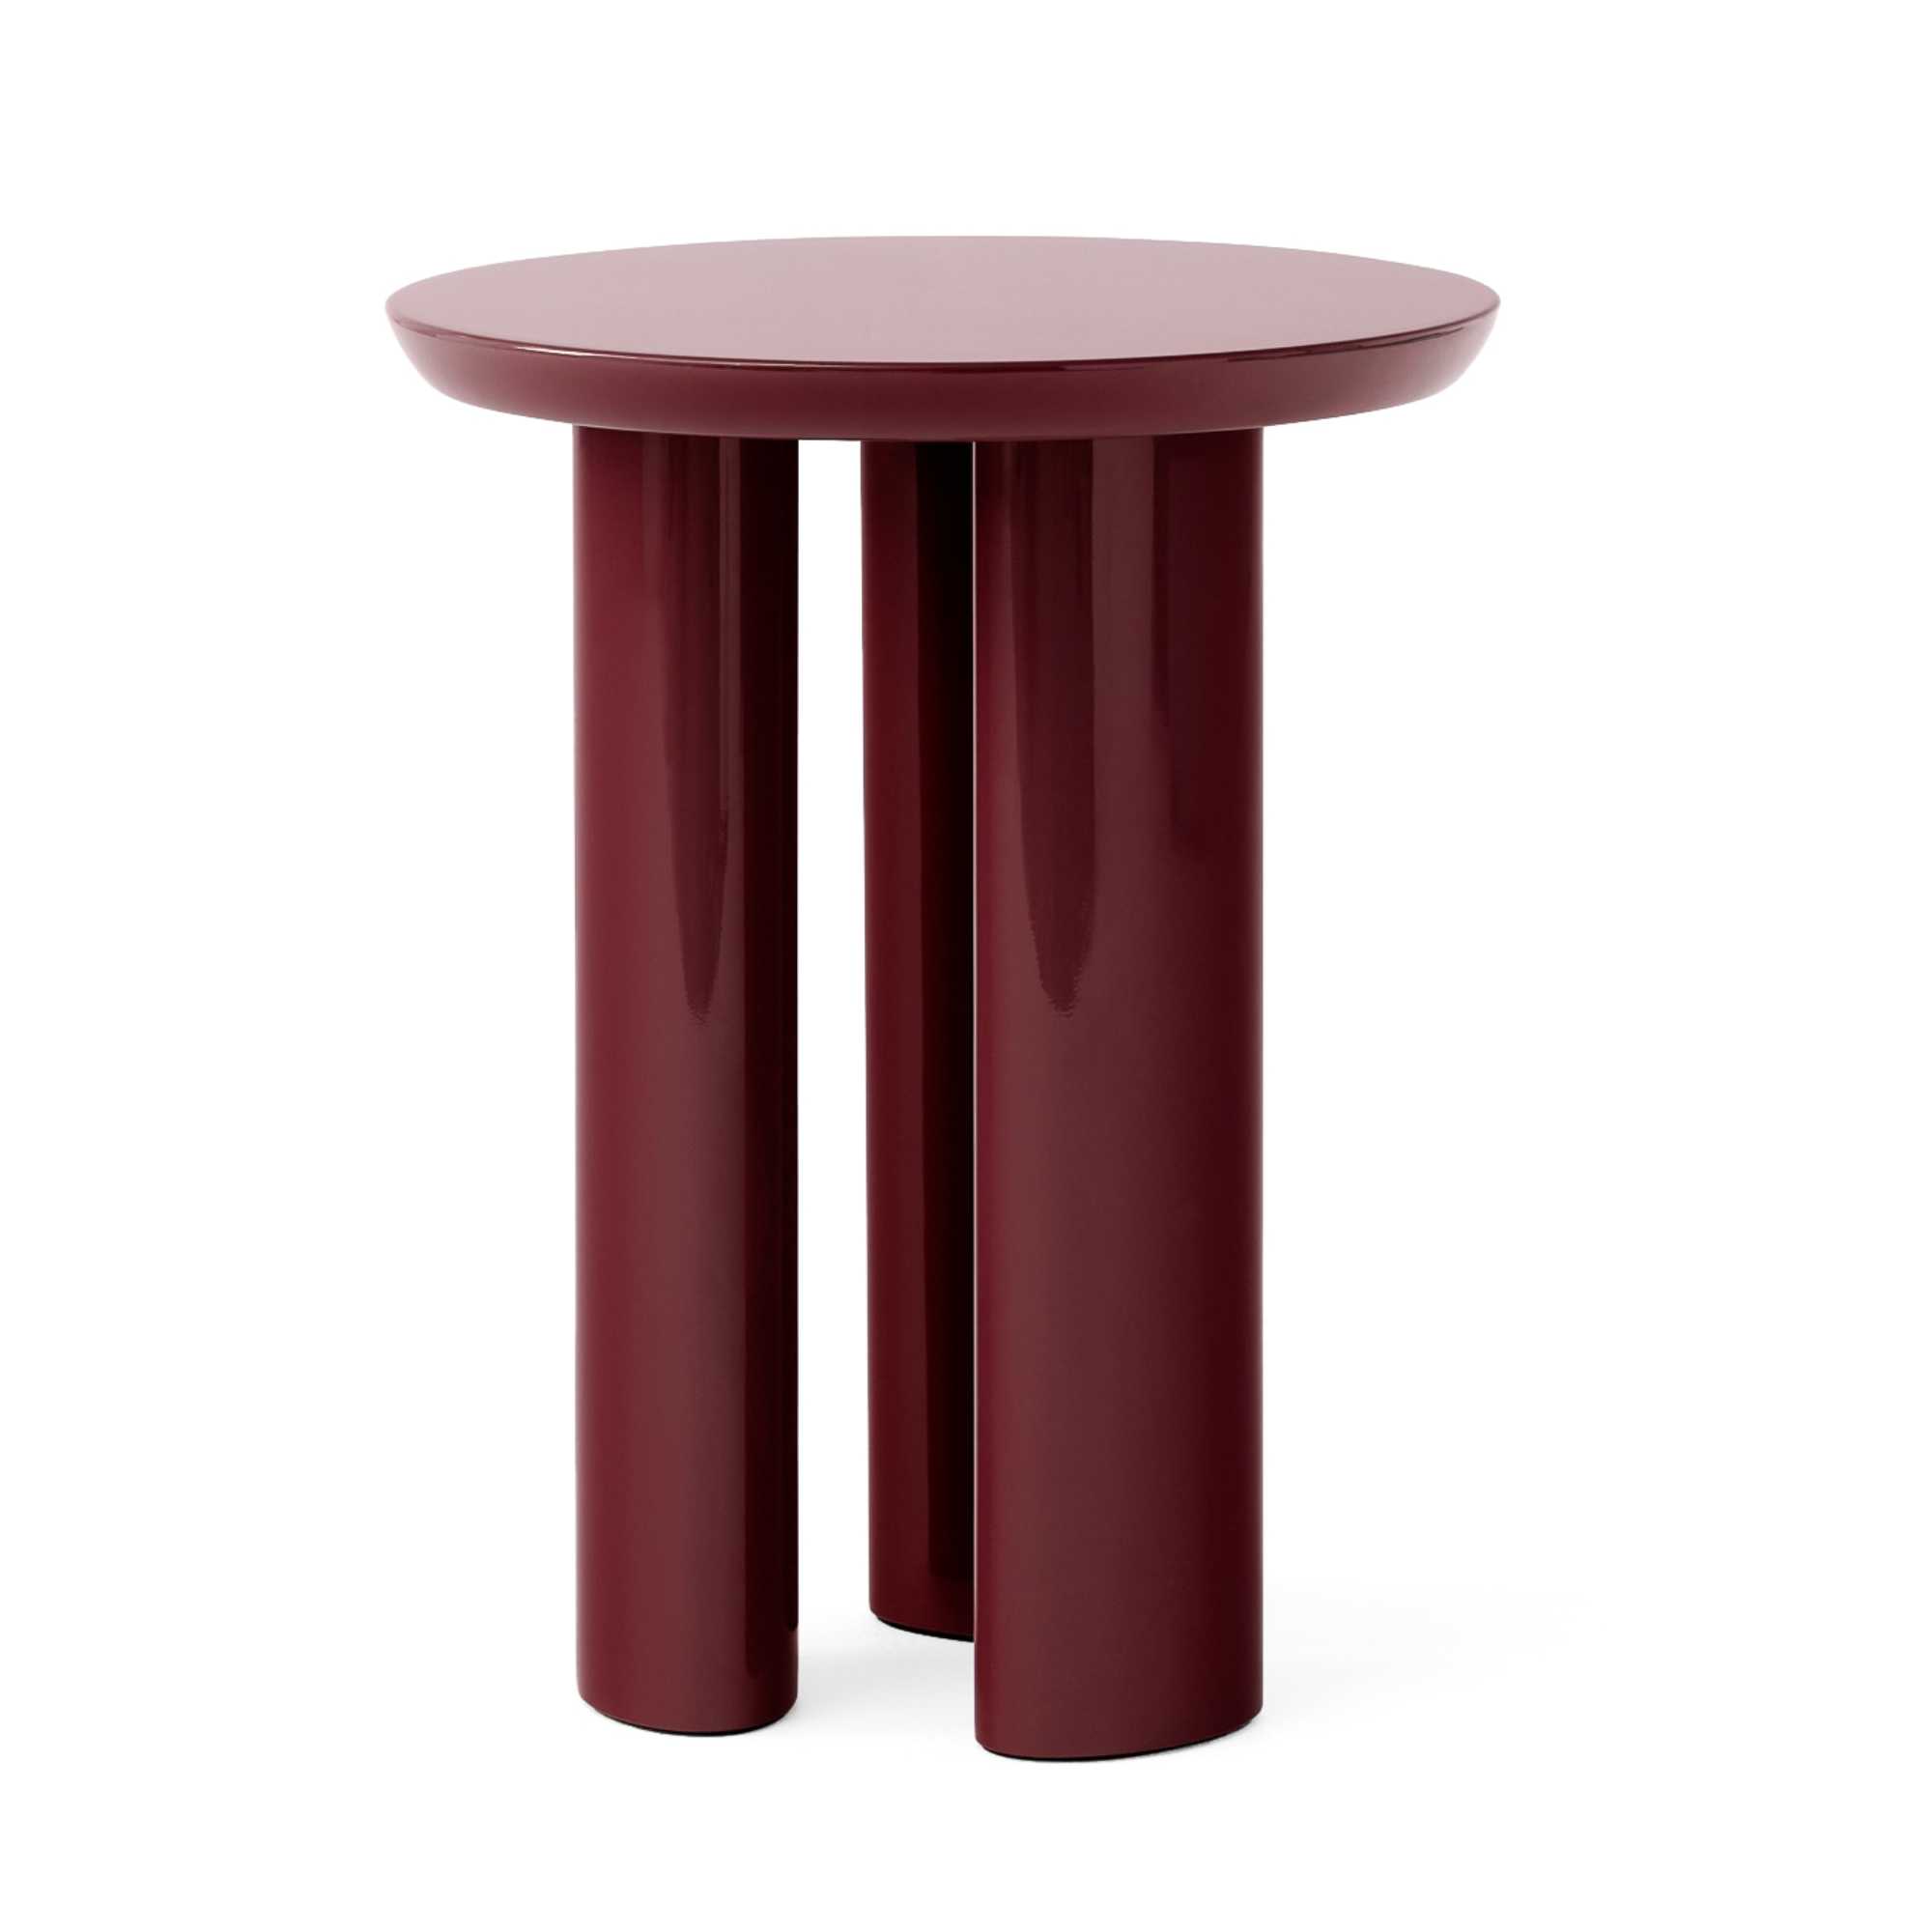 &Tradition JA3 Tung Side Table, Burgundy Red